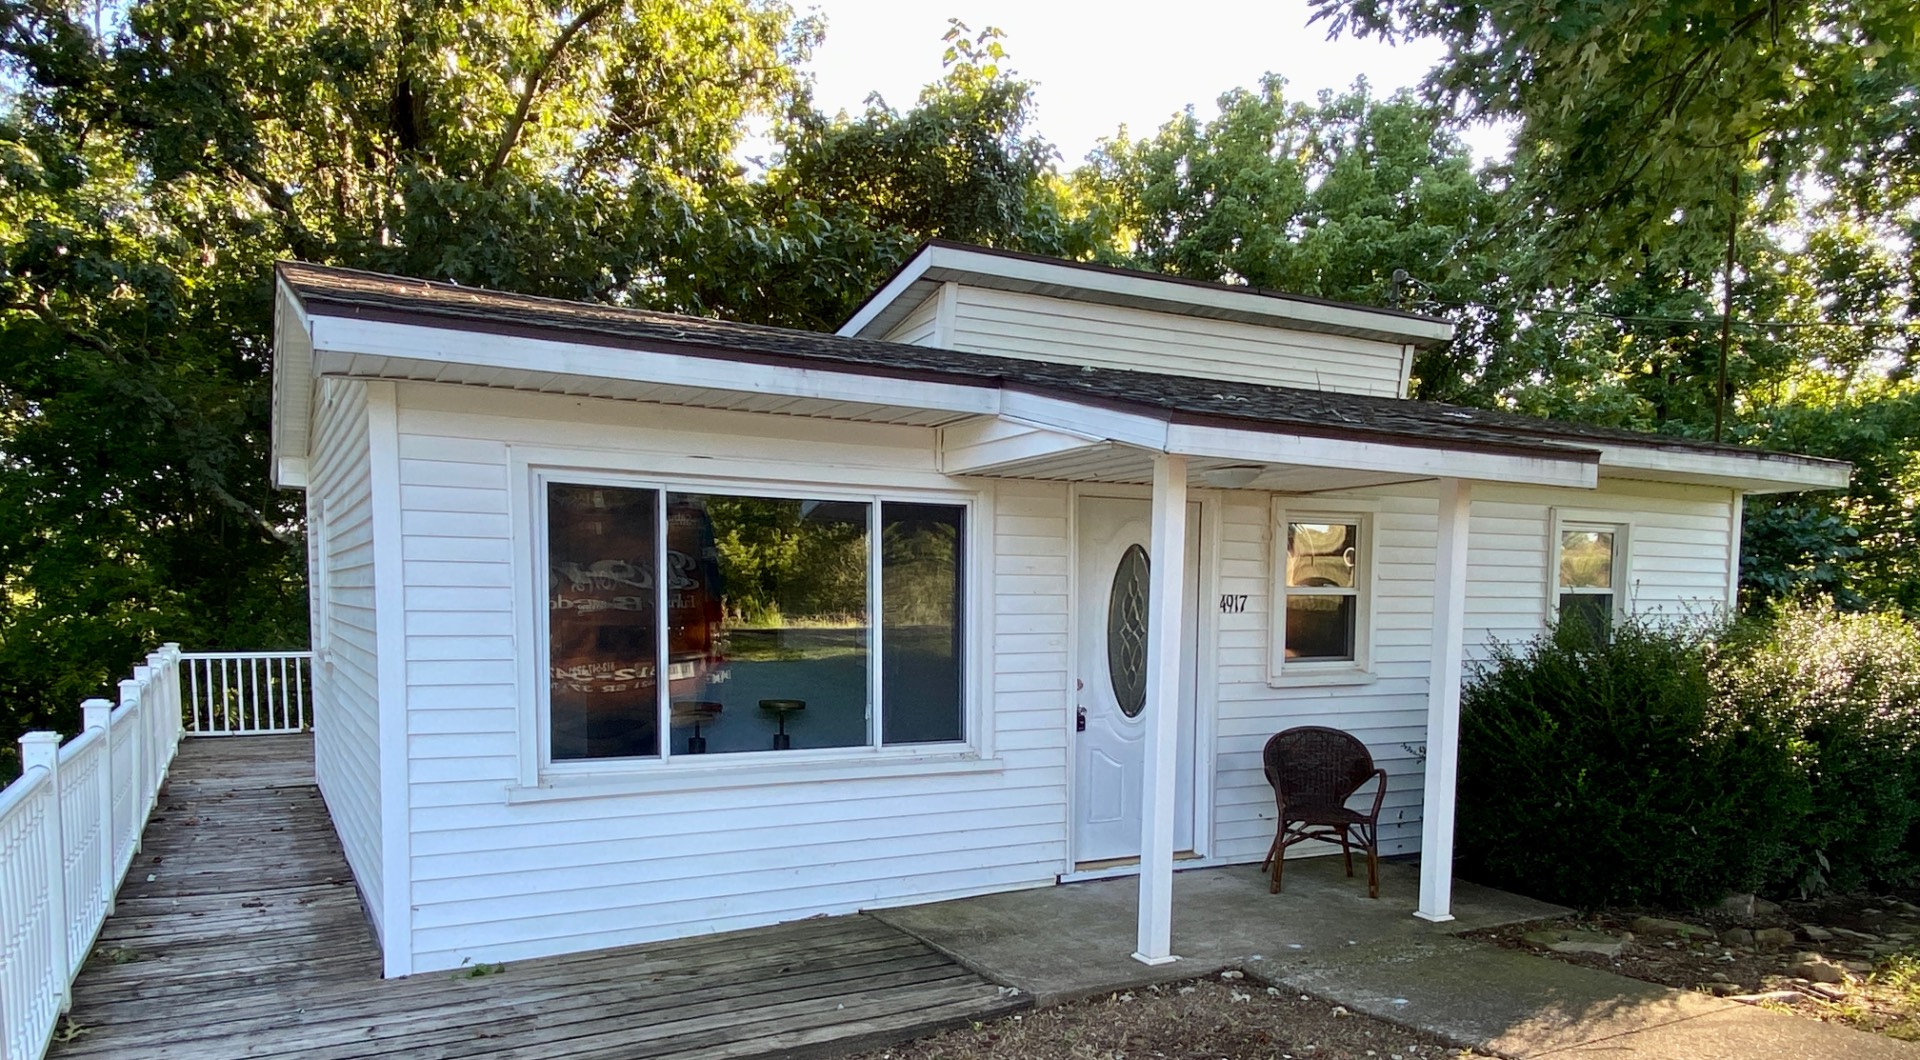 Under 100k! Remodeled 2 Bed/1 Bath on the Outskirts of Town